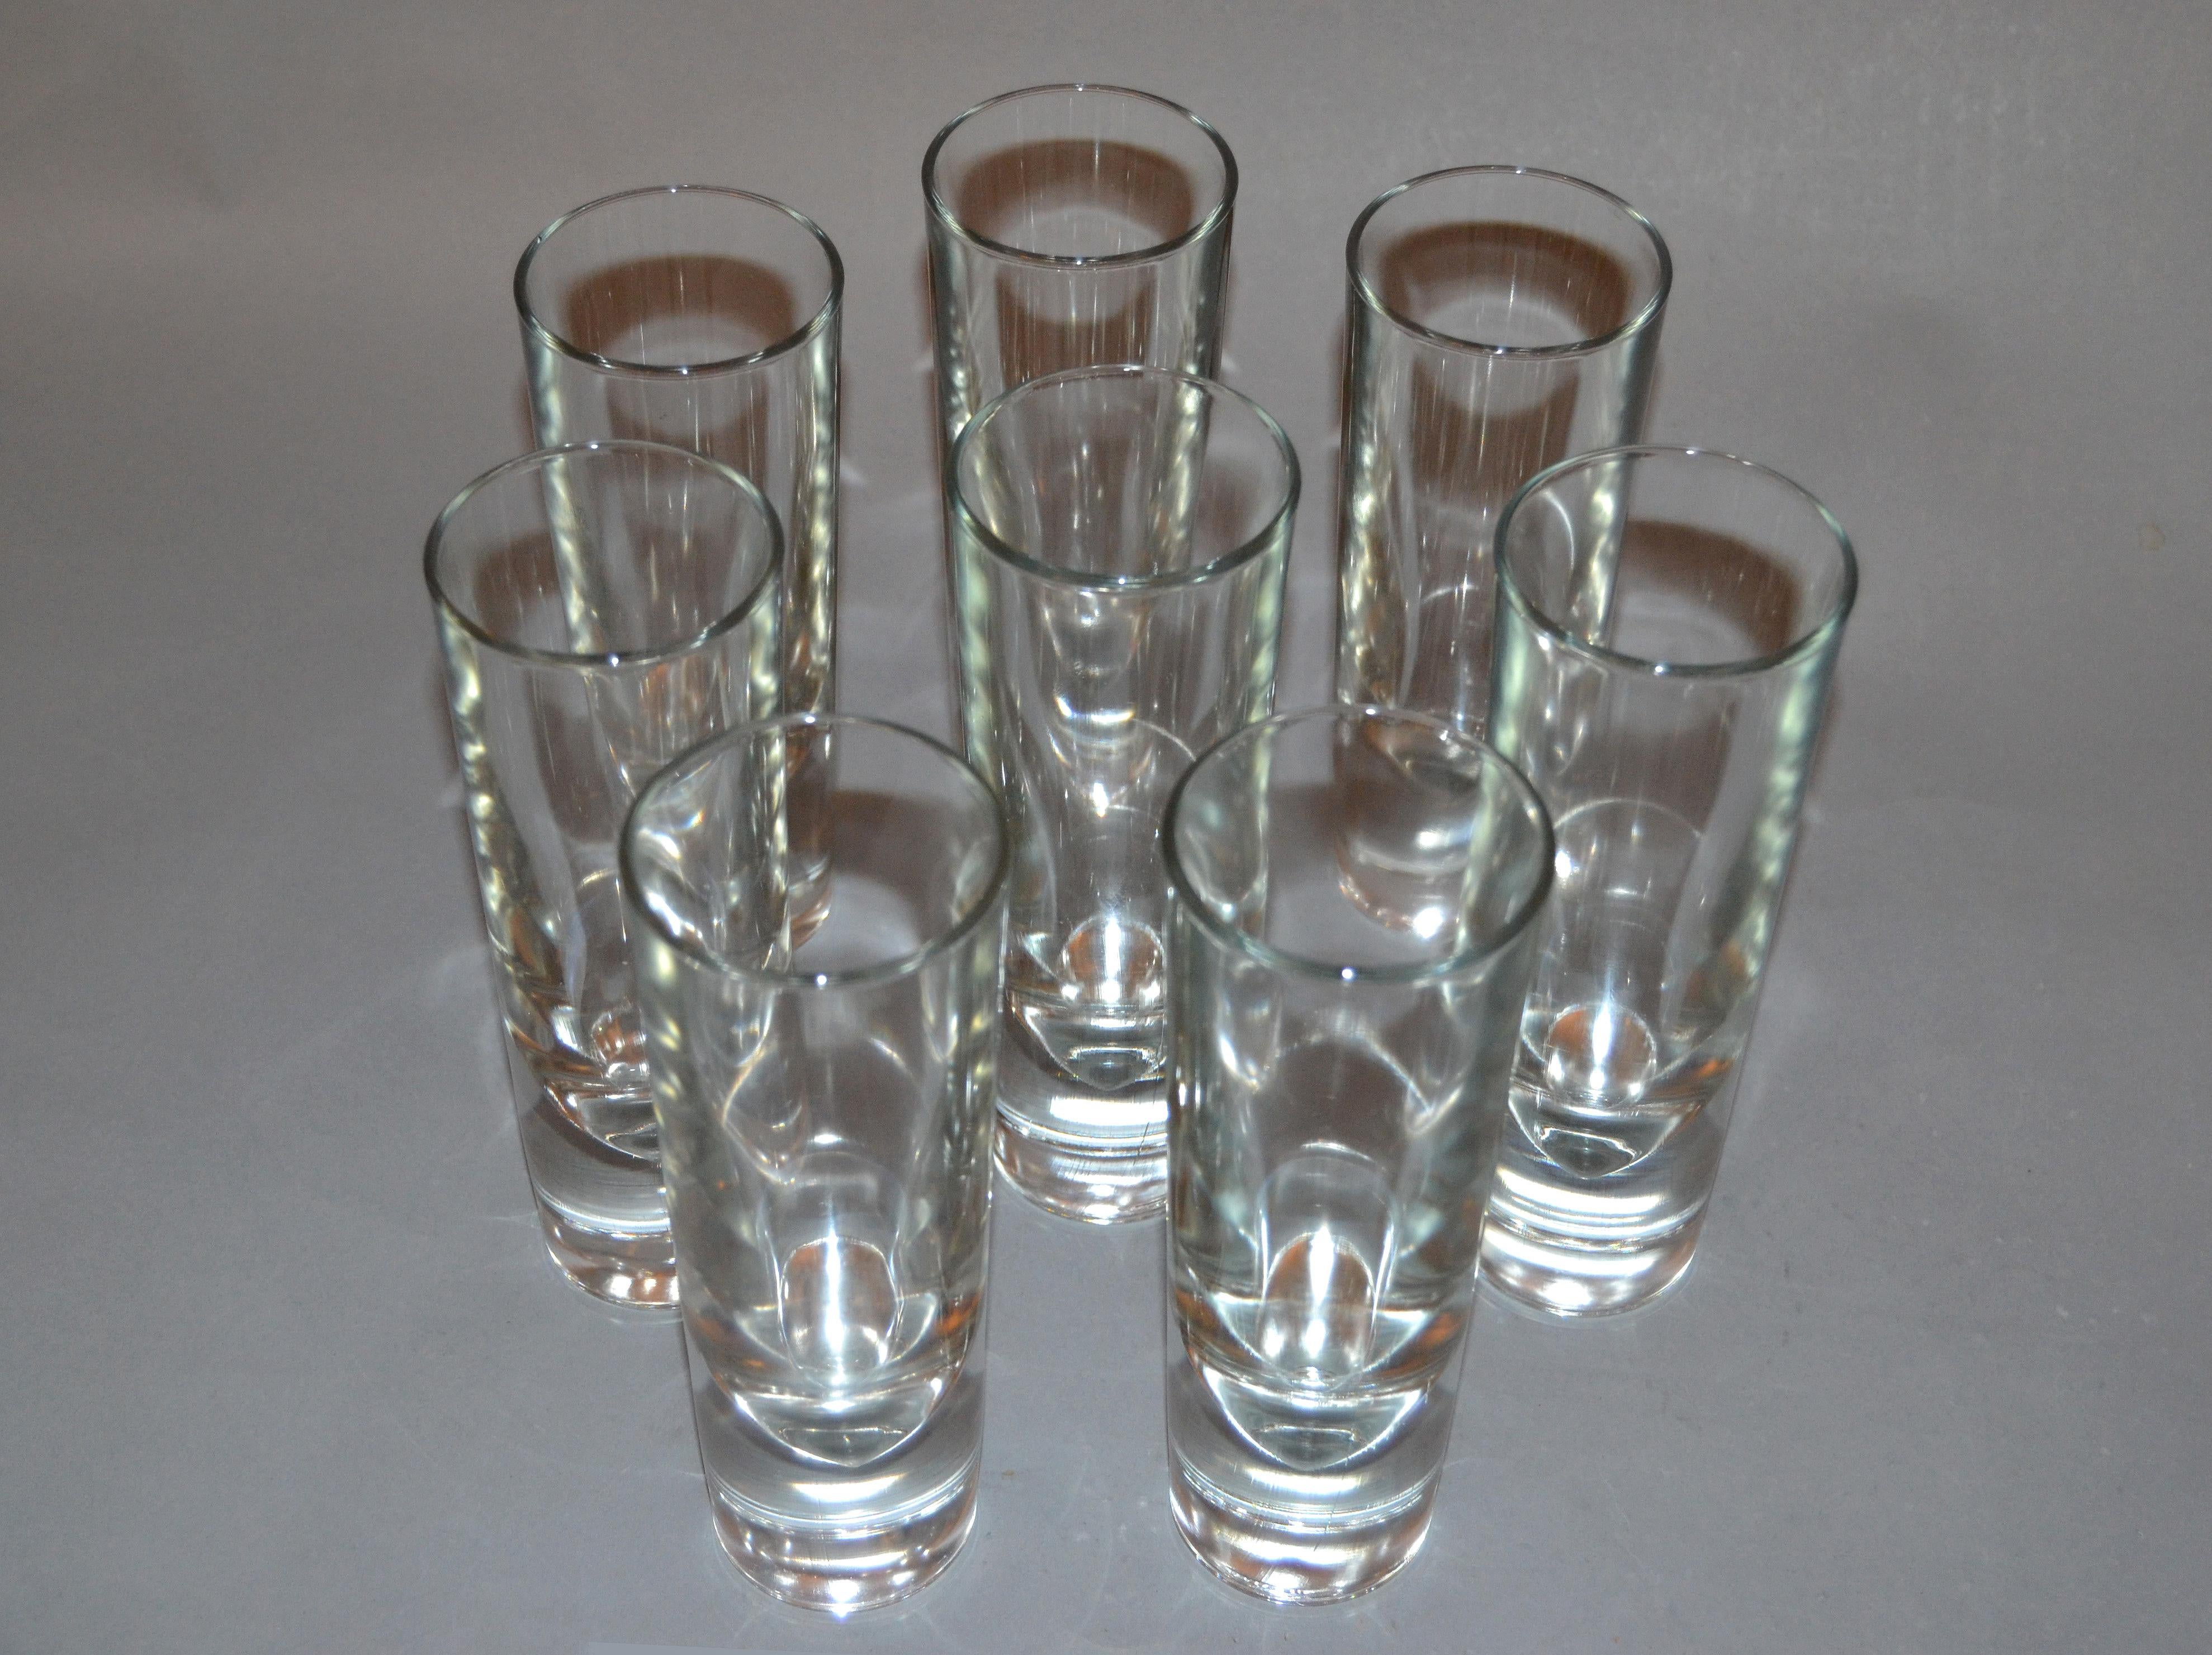 Late 20th Century Set of 8 Carlo Moretti Modern Heavy Blown Glass Drinking Glasses Glassware Italy For Sale